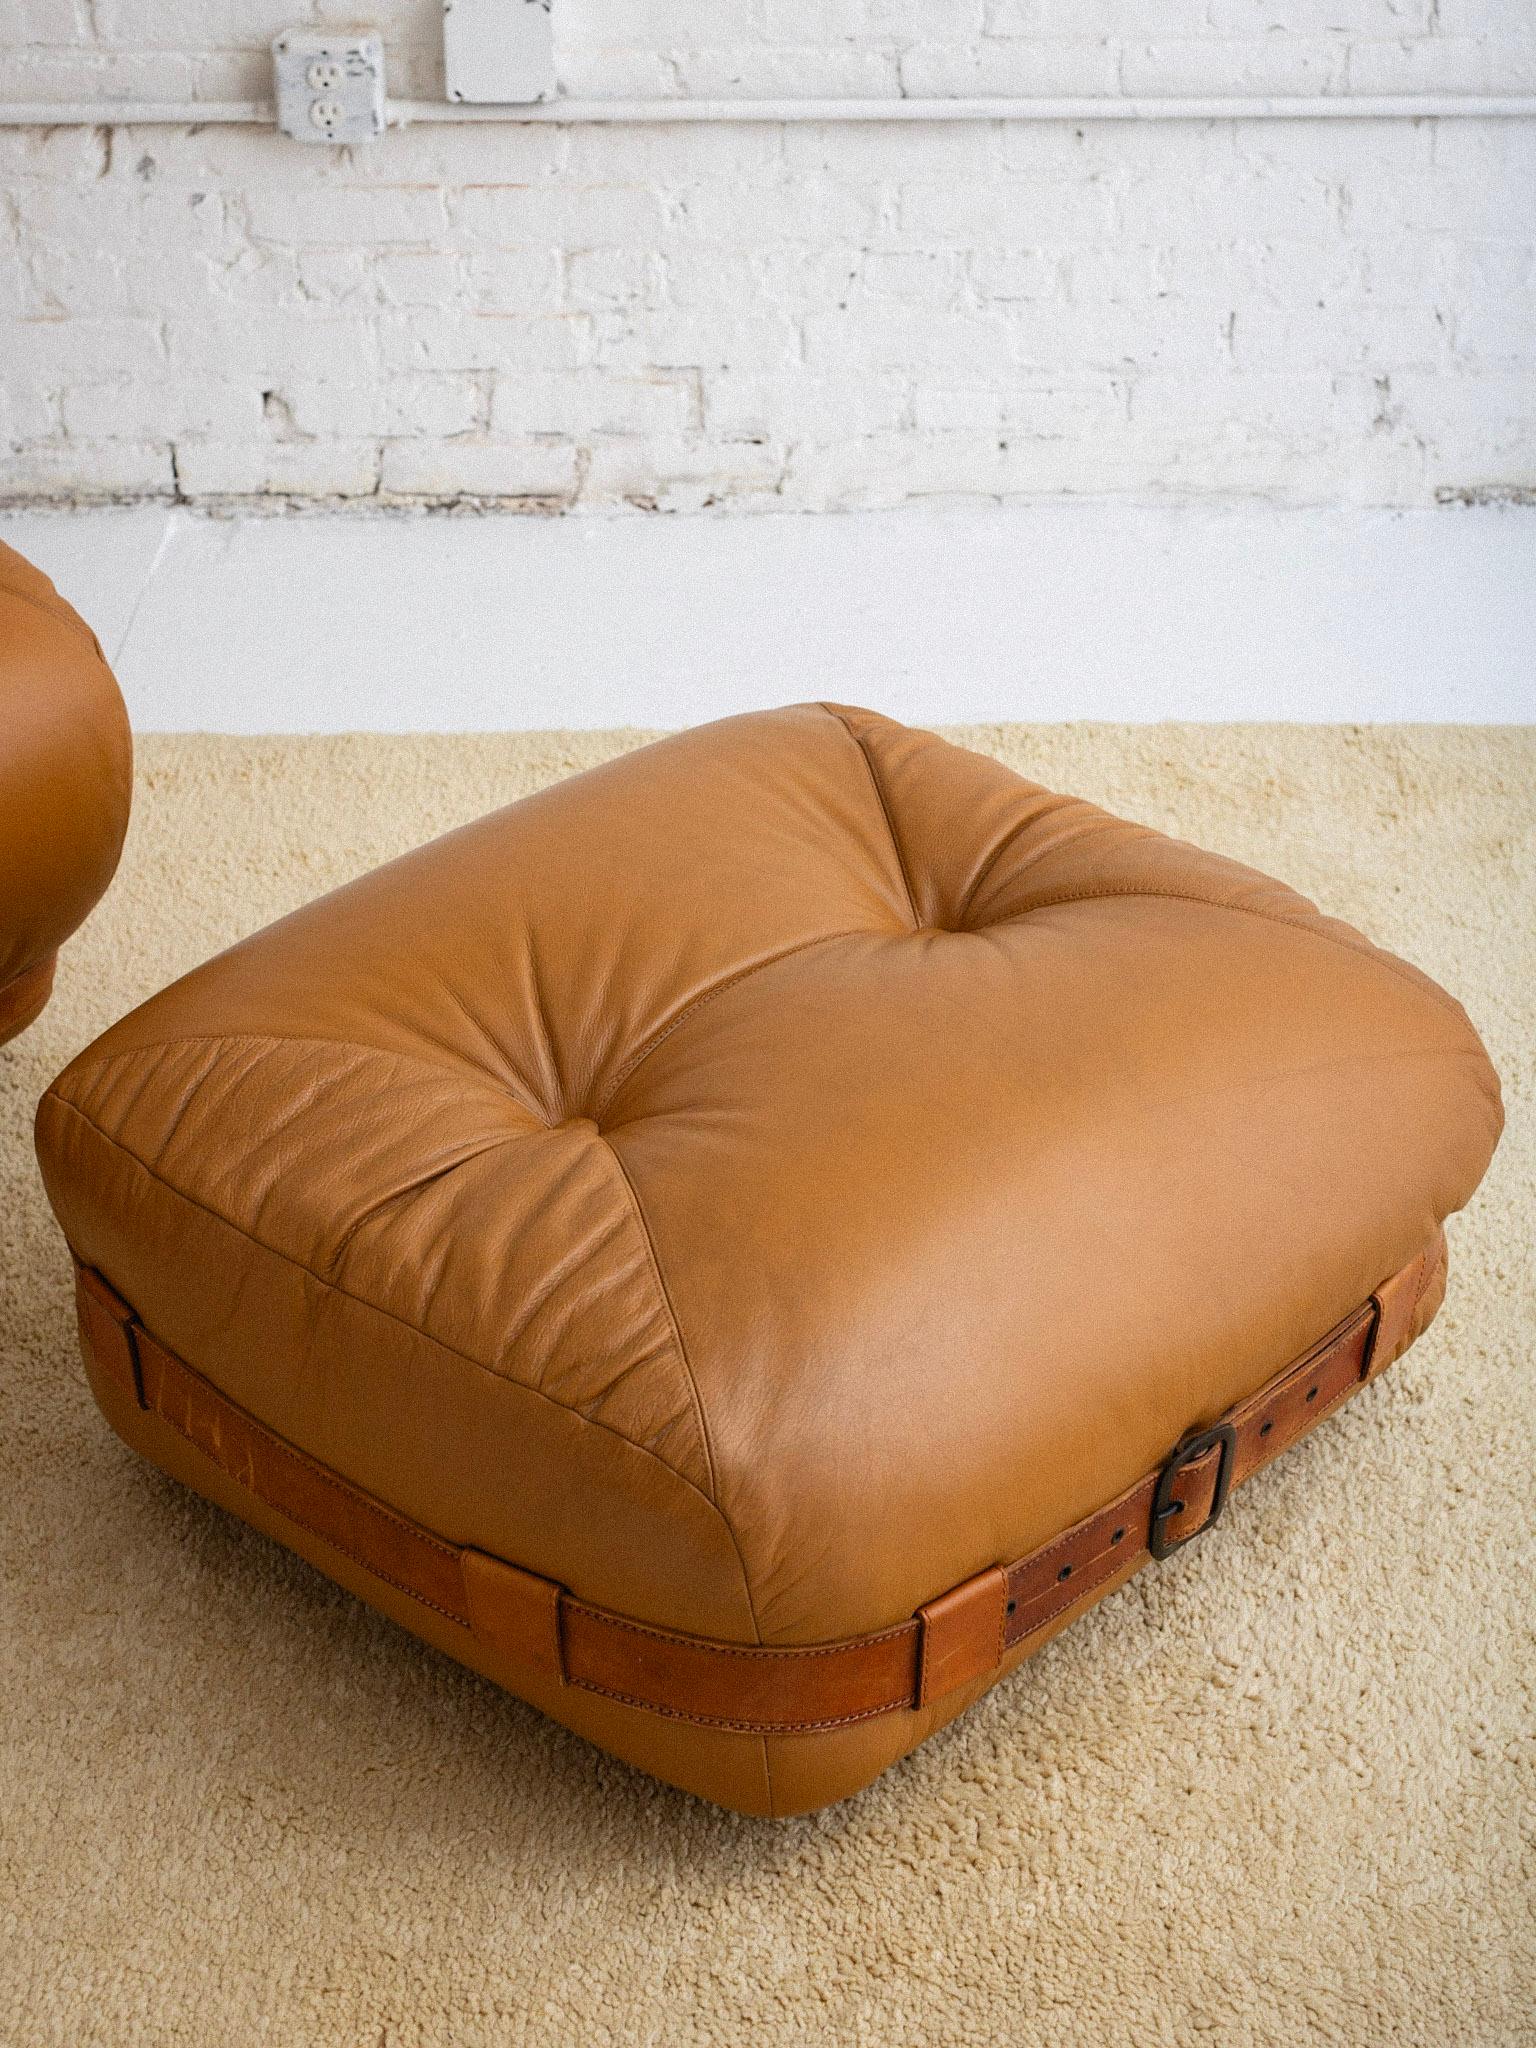 Overstuffed Italian Leather Lounge Chair & Ottoman For Sale 7